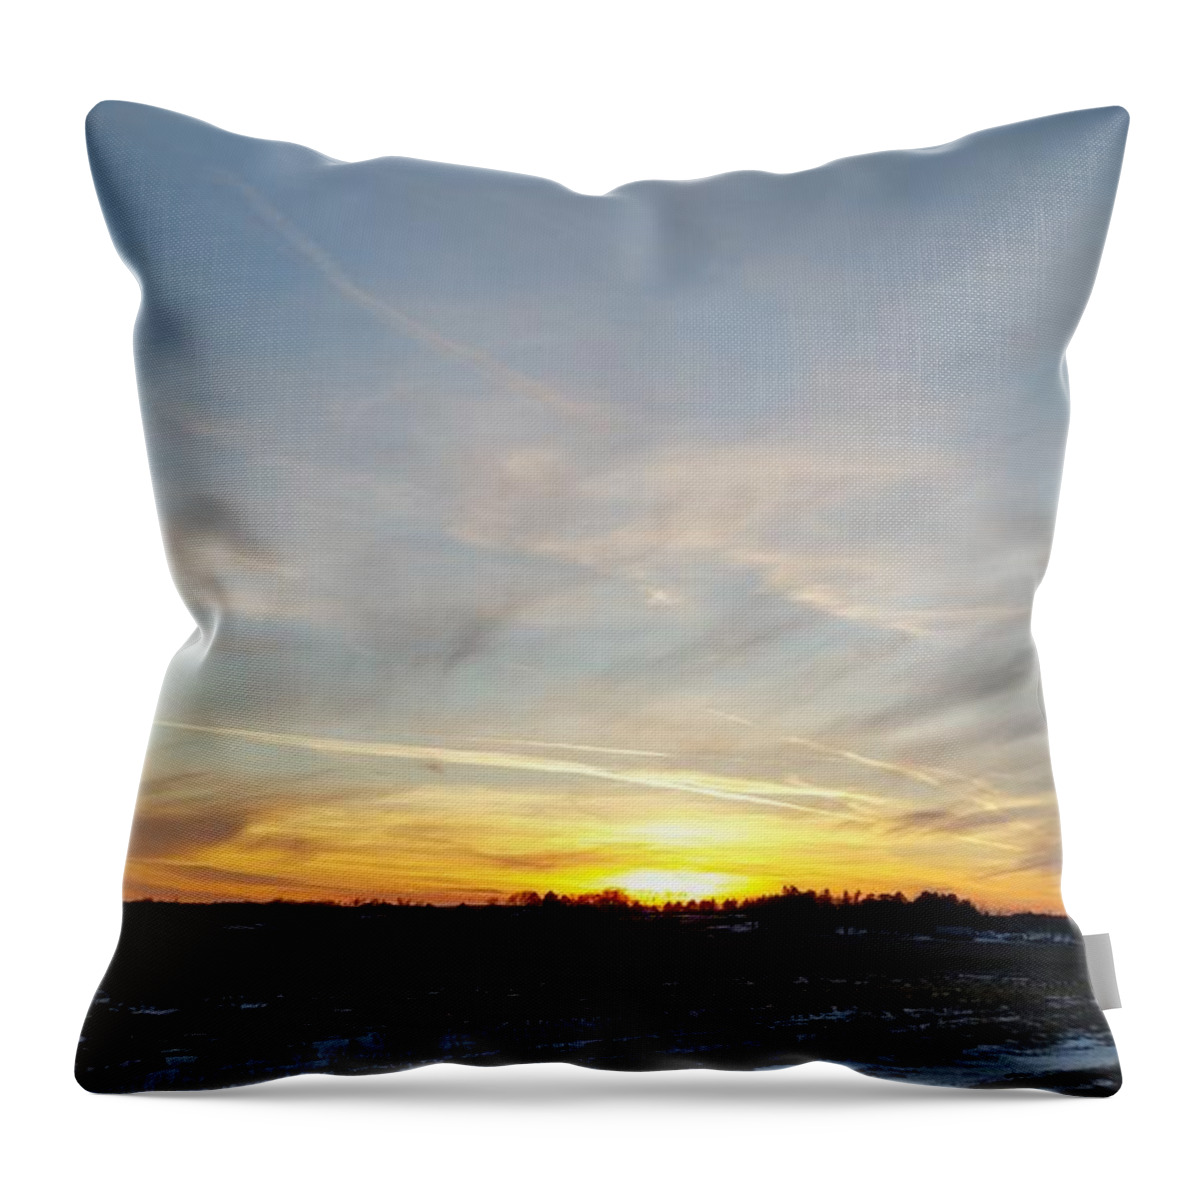 Branched Oak Lake Throw Pillow featuring the photograph Winter Road by Caryl J Bohn